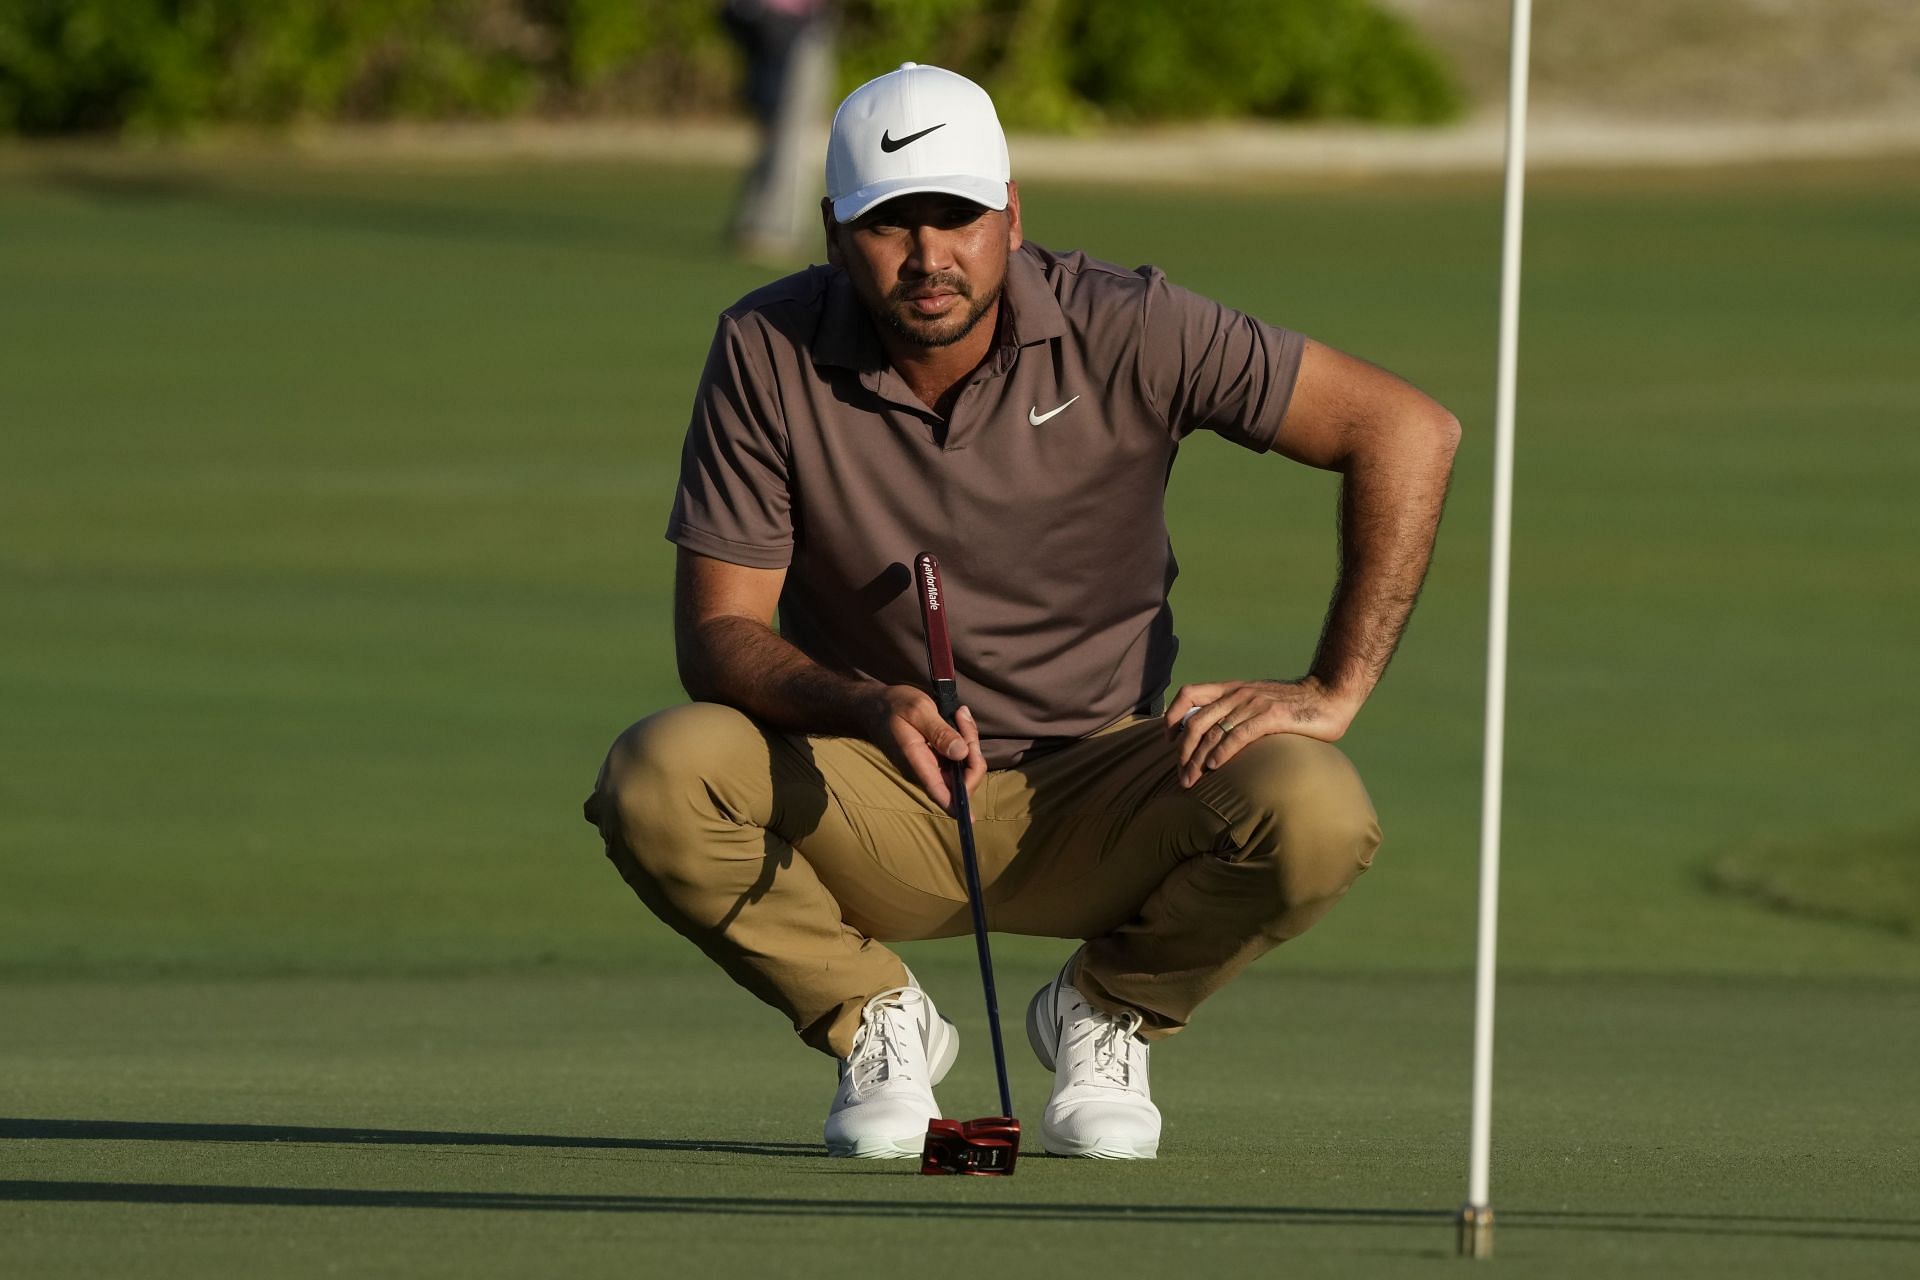 “Makes my job easier” - Jason Day comments on Jon Rahm's rumored move ...